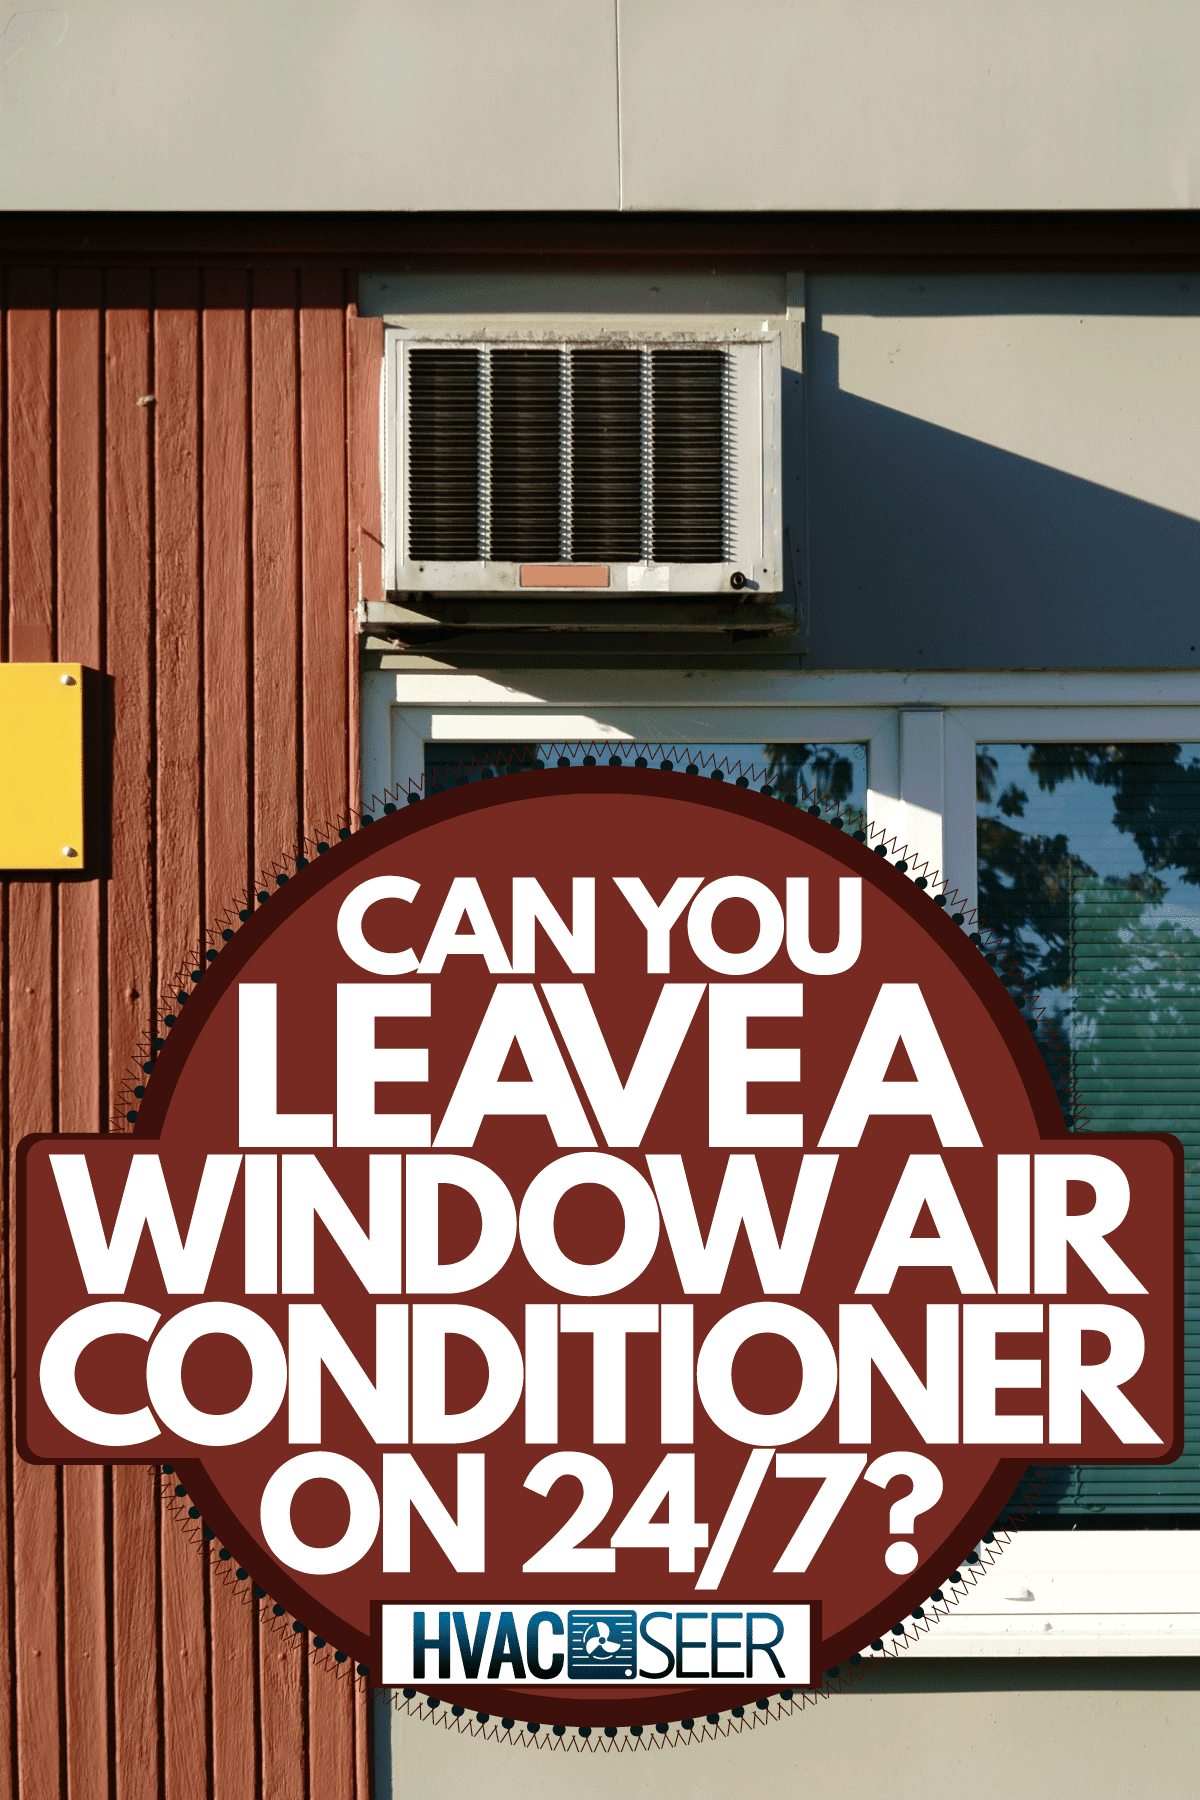 Exterior of a wooden barrack with a sliding window and an air conditioning unit, Can You Leave A Window Air Conditioner On 24/7?